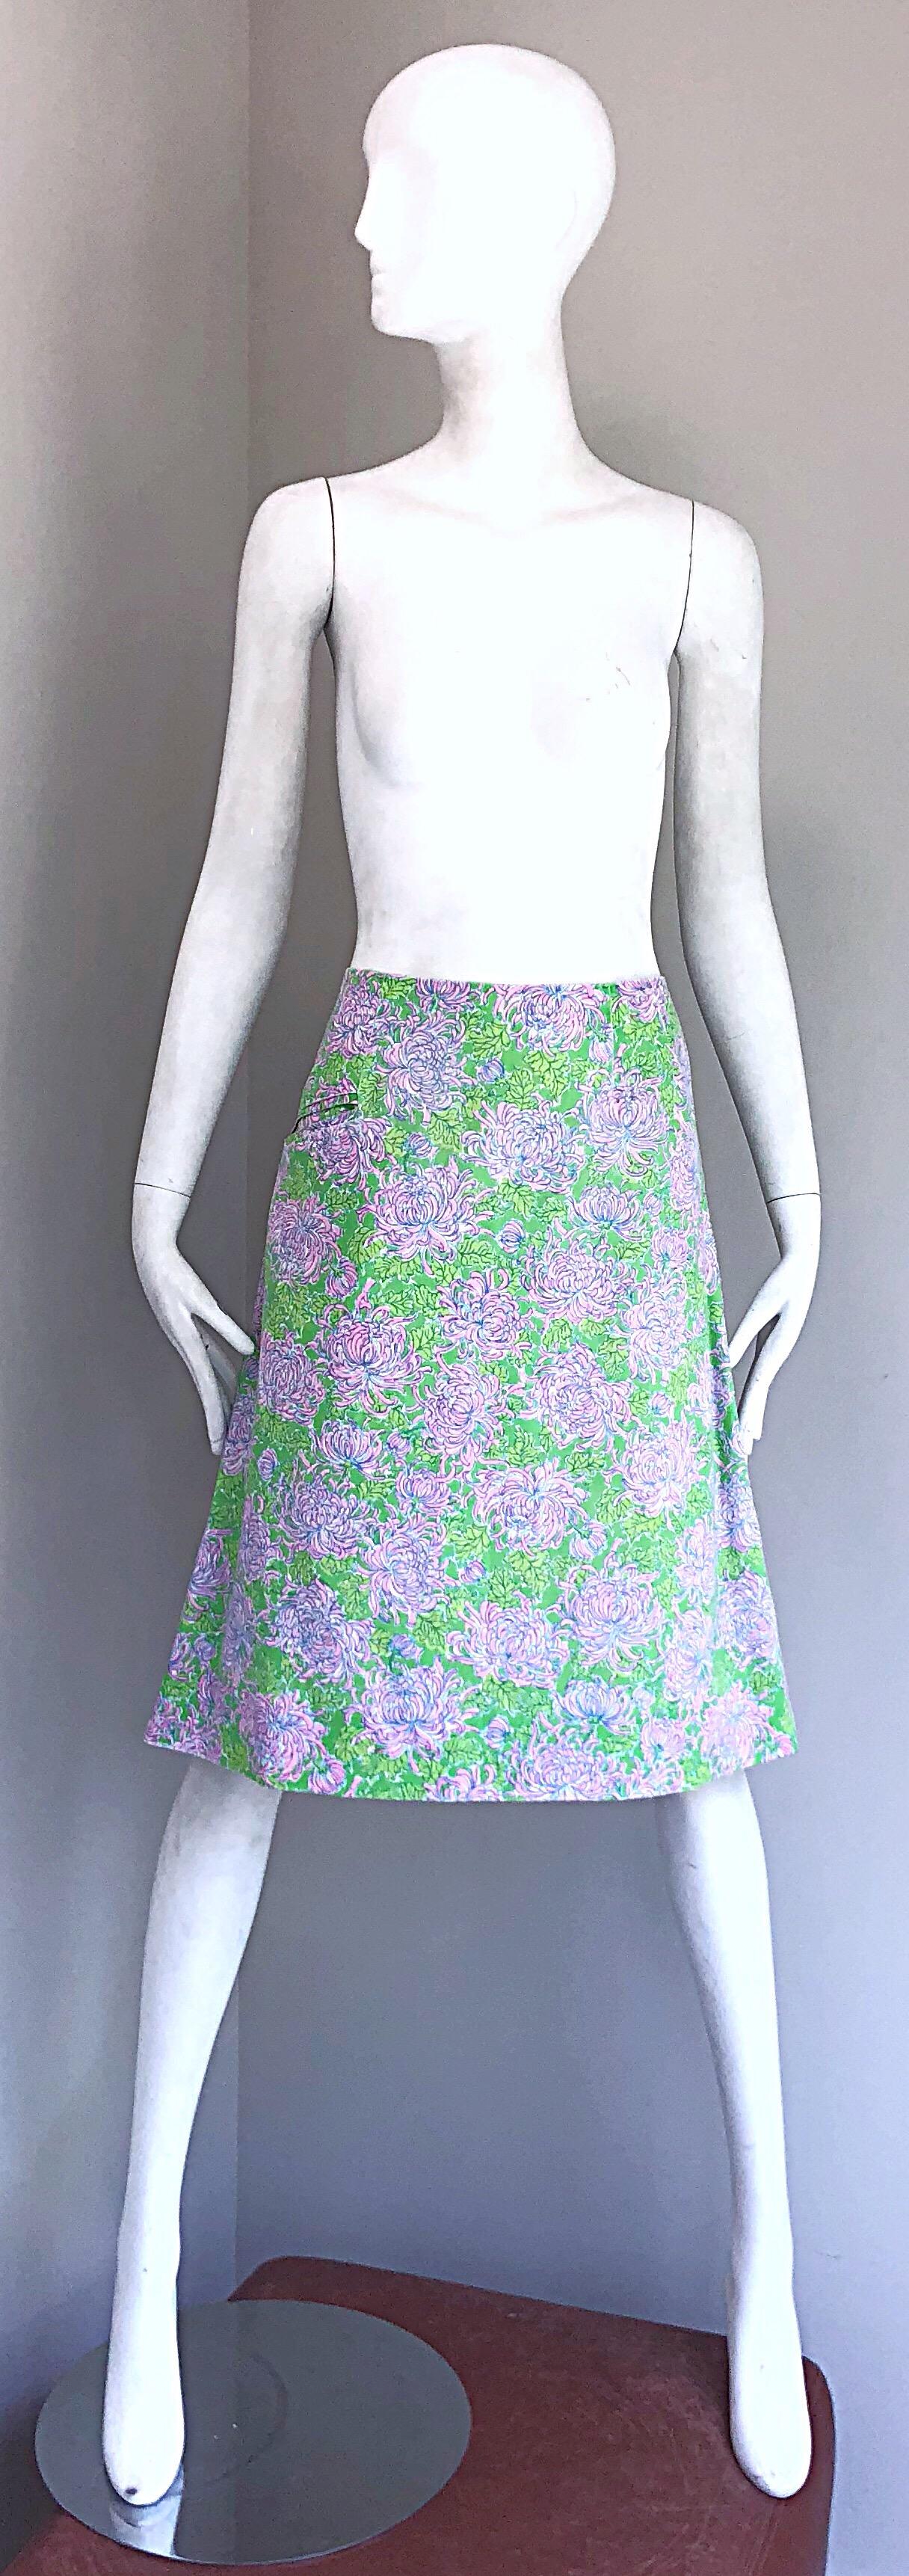 Rare Early LILLY PULITZER 1960s neon green and pink flower carnation print cotton A - Line skirt! Features vibrant colors of green, pink and blue throughout. POCKET at the right side of the hip. Hidden metal zipper up the side with hook-and-eye